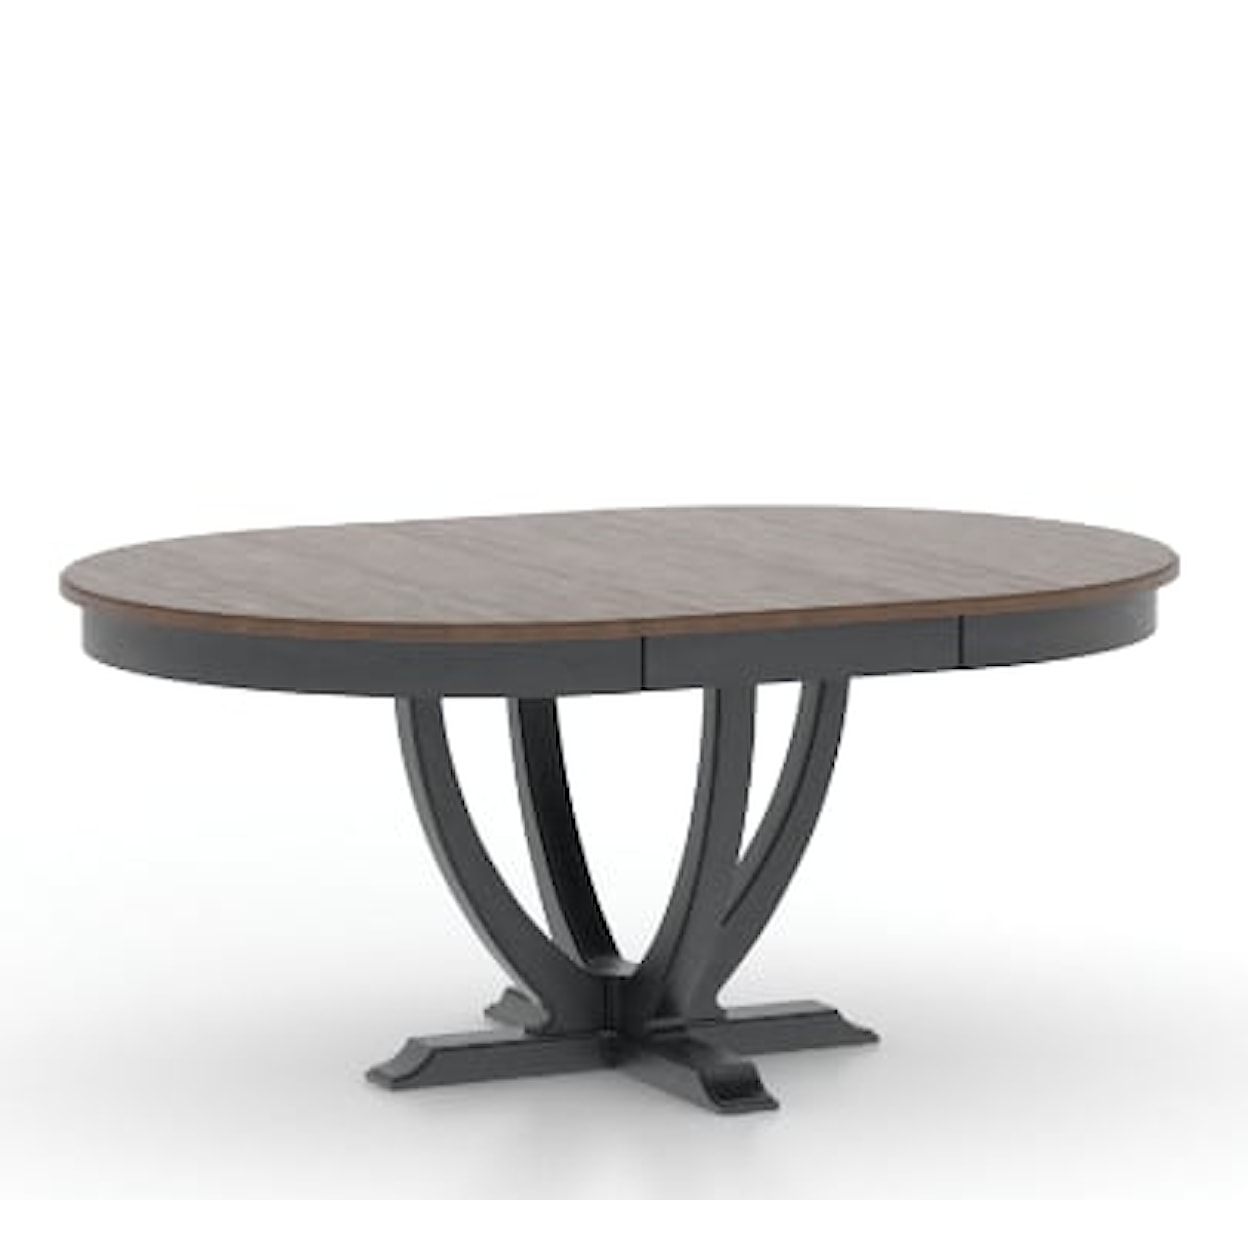 Canadel Canadel Oval Wood Table